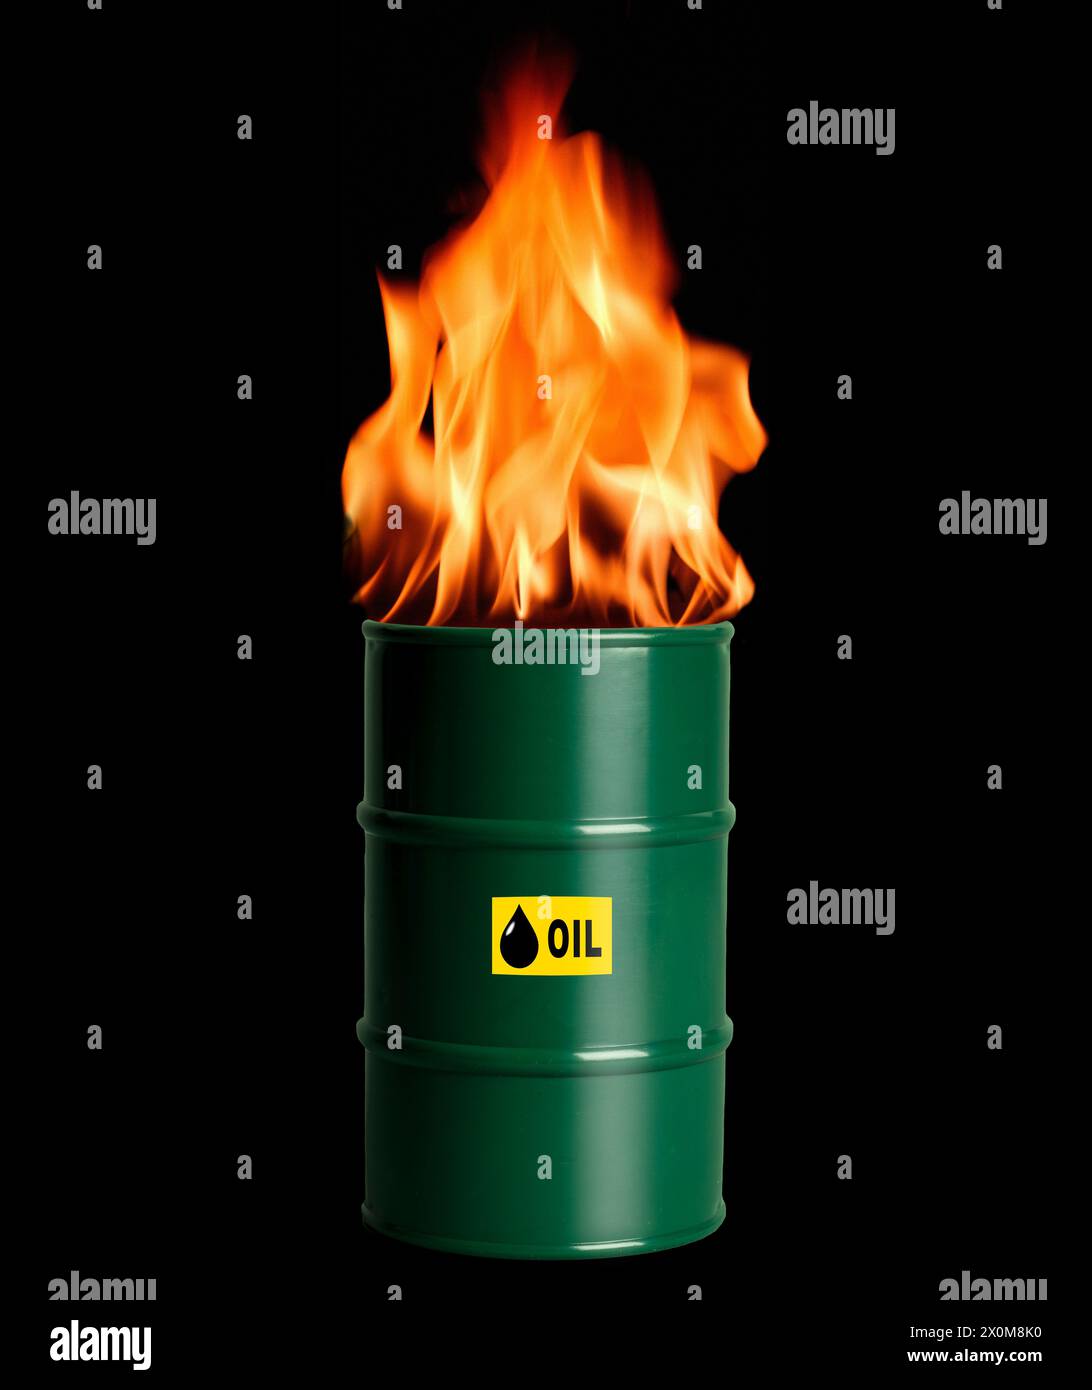 Burning oil drum, composite image. Fossil fuels are made from decomposing plants and animals. Oil is an example of a fossil fuel. These fuels are found in Earth's crust and contain carbon and hydrogen, which can be burned for energy. Fossil fuels are by far the largest contributor to global climate change, accounting for over 75 percent of global greenhouse gas emissions. Stock Photo